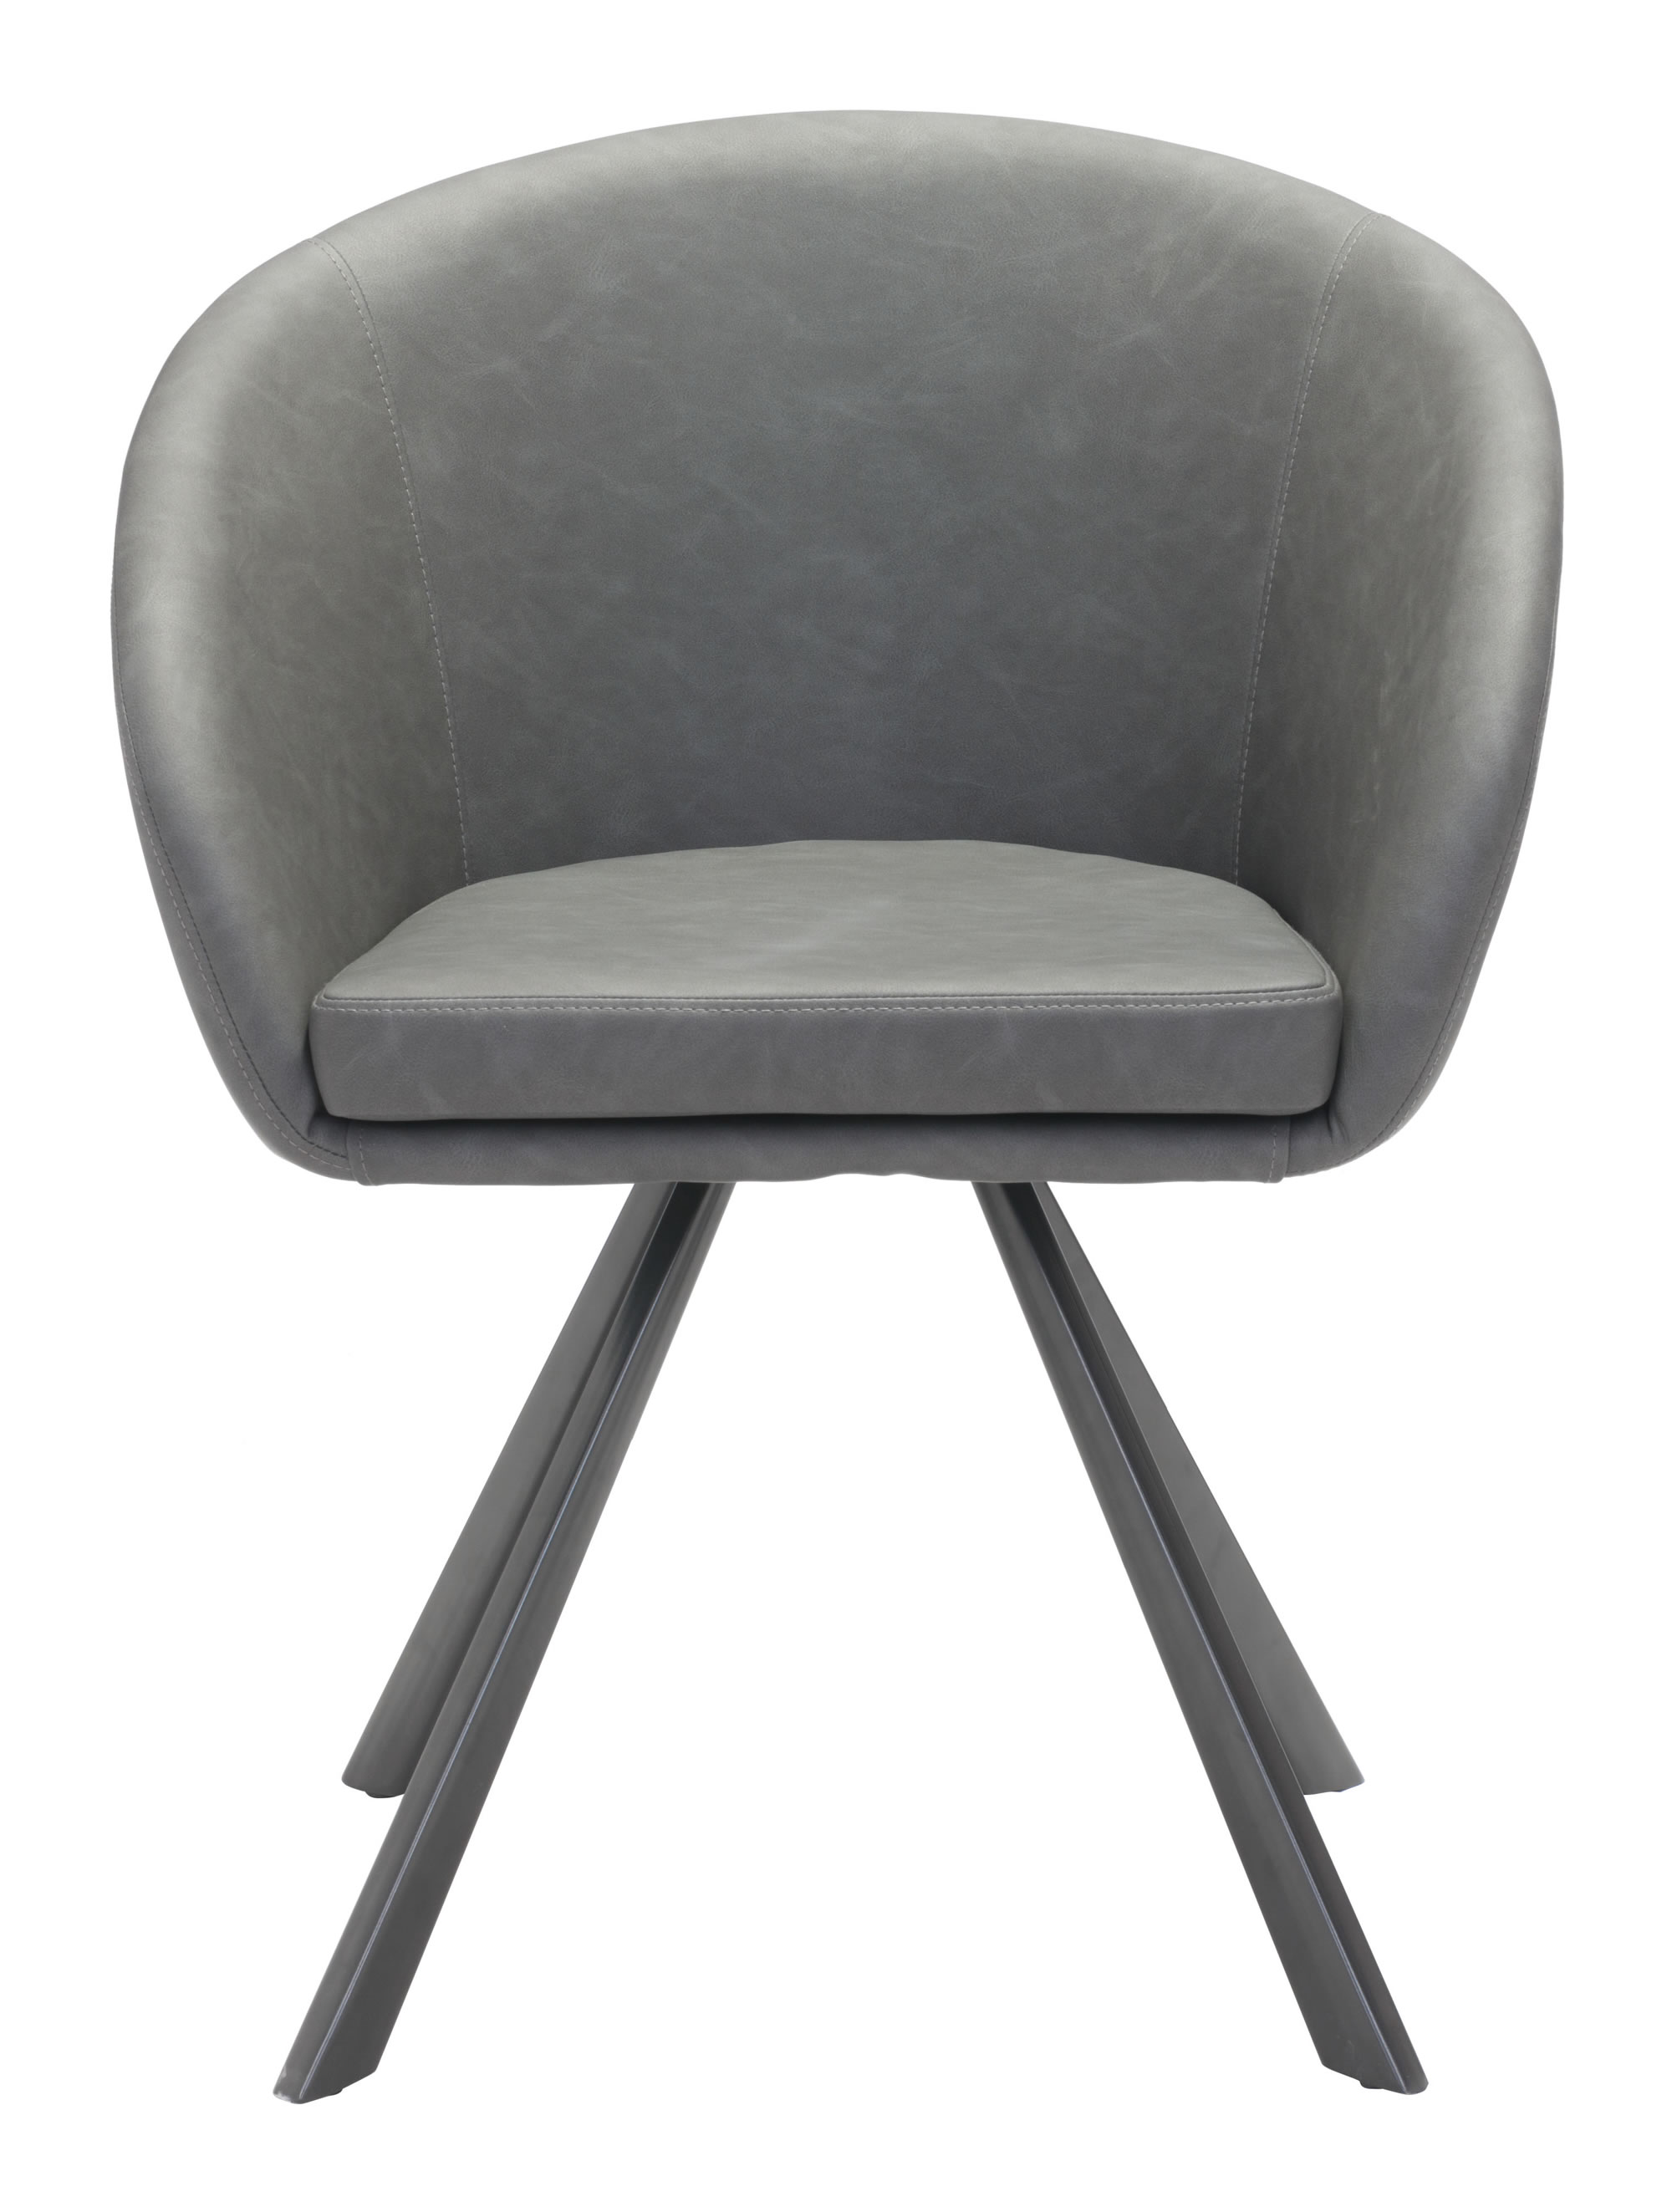 25.2" x 22.4" x 31.9" Gray, Leatherette, Steel, Dining Chair